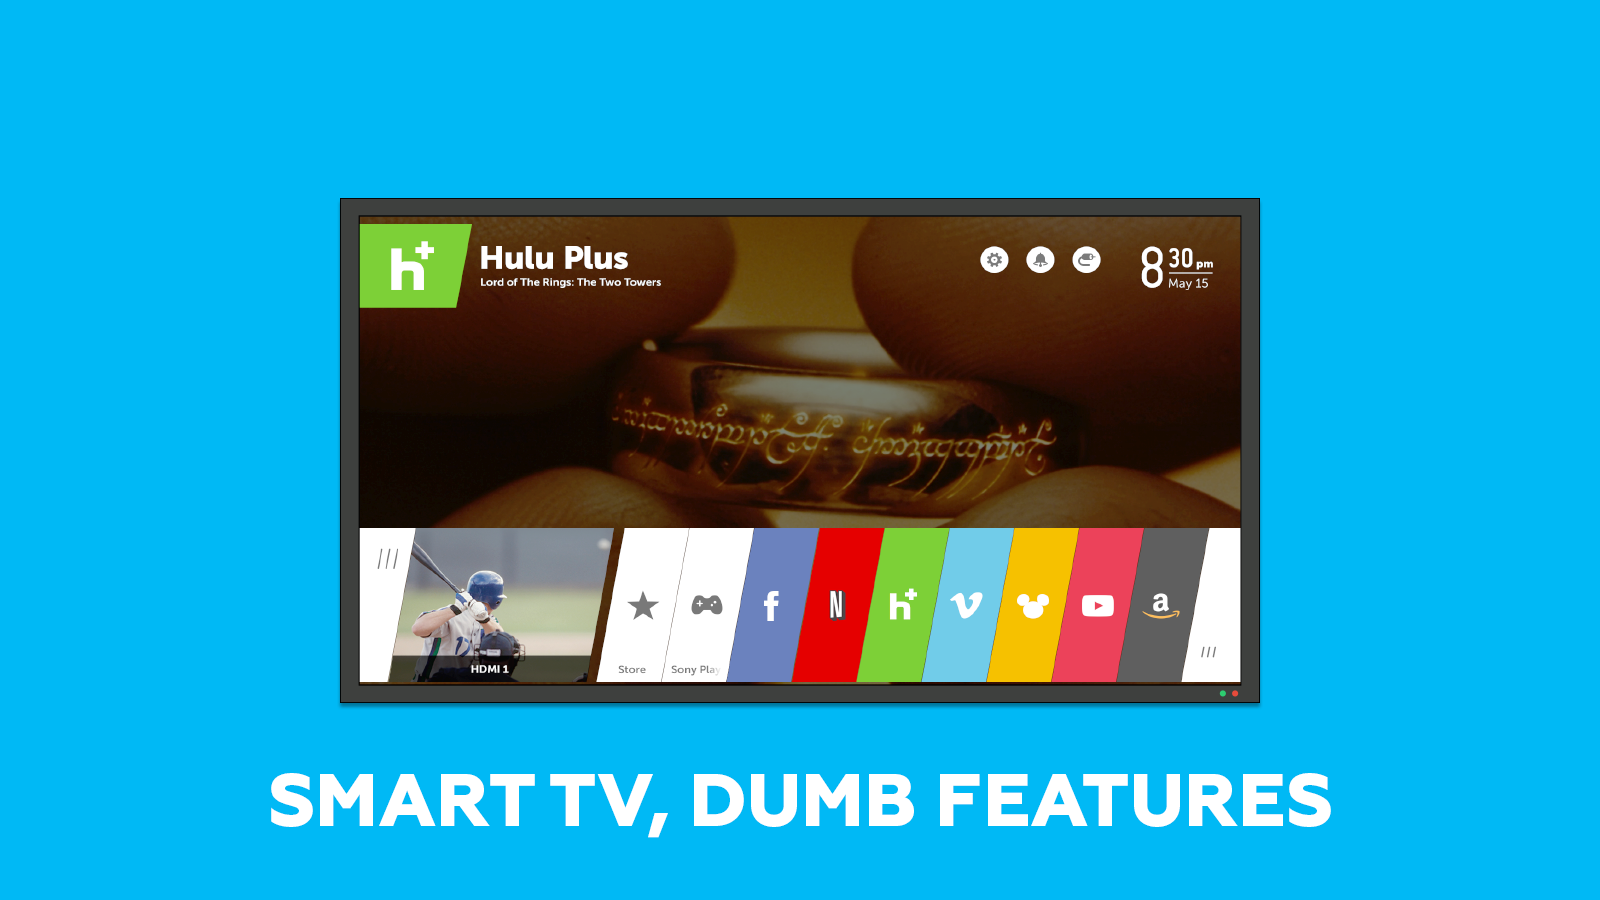 Smar tvs and dumb features